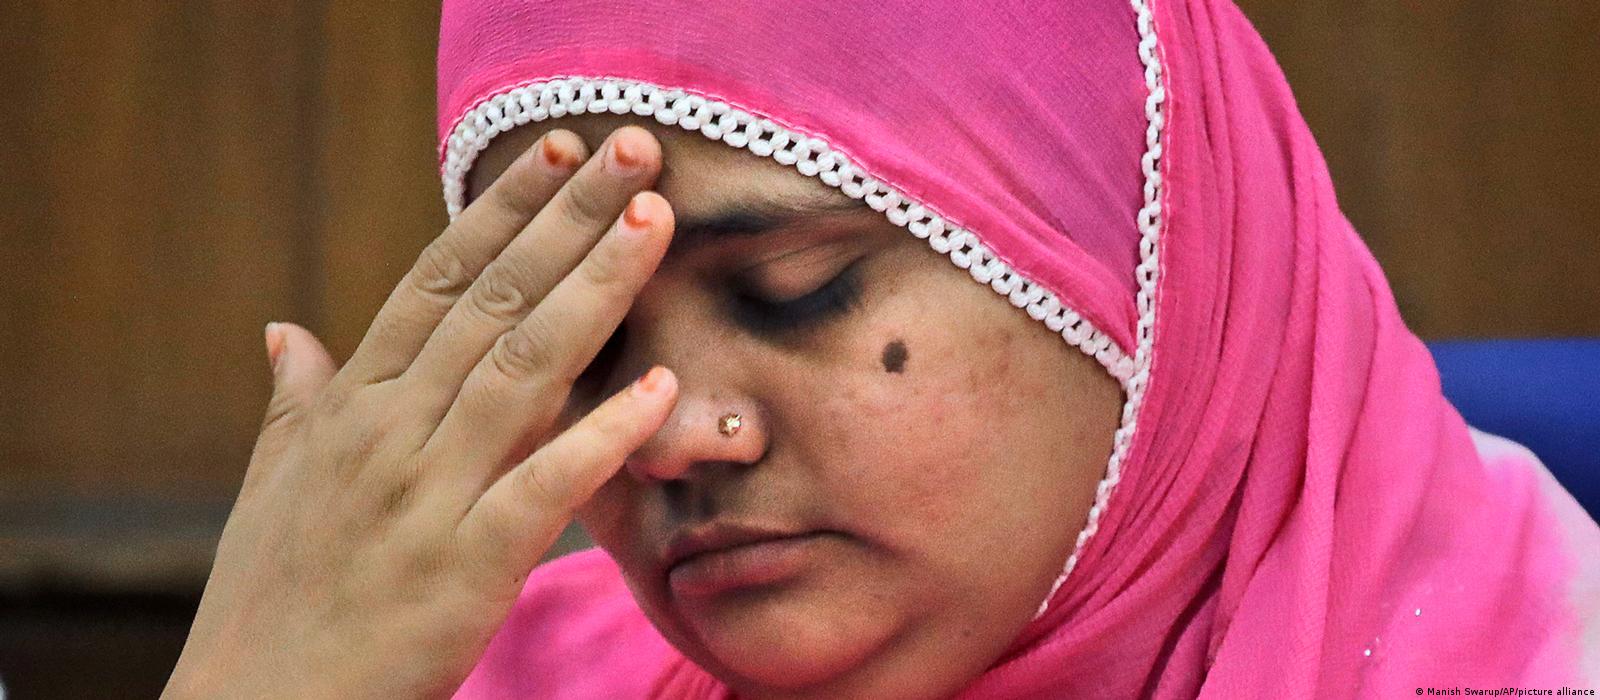 Rape Girl Beeg - India: Rape victim aghast at attackers' release â€“ DW â€“ 08/18/2022